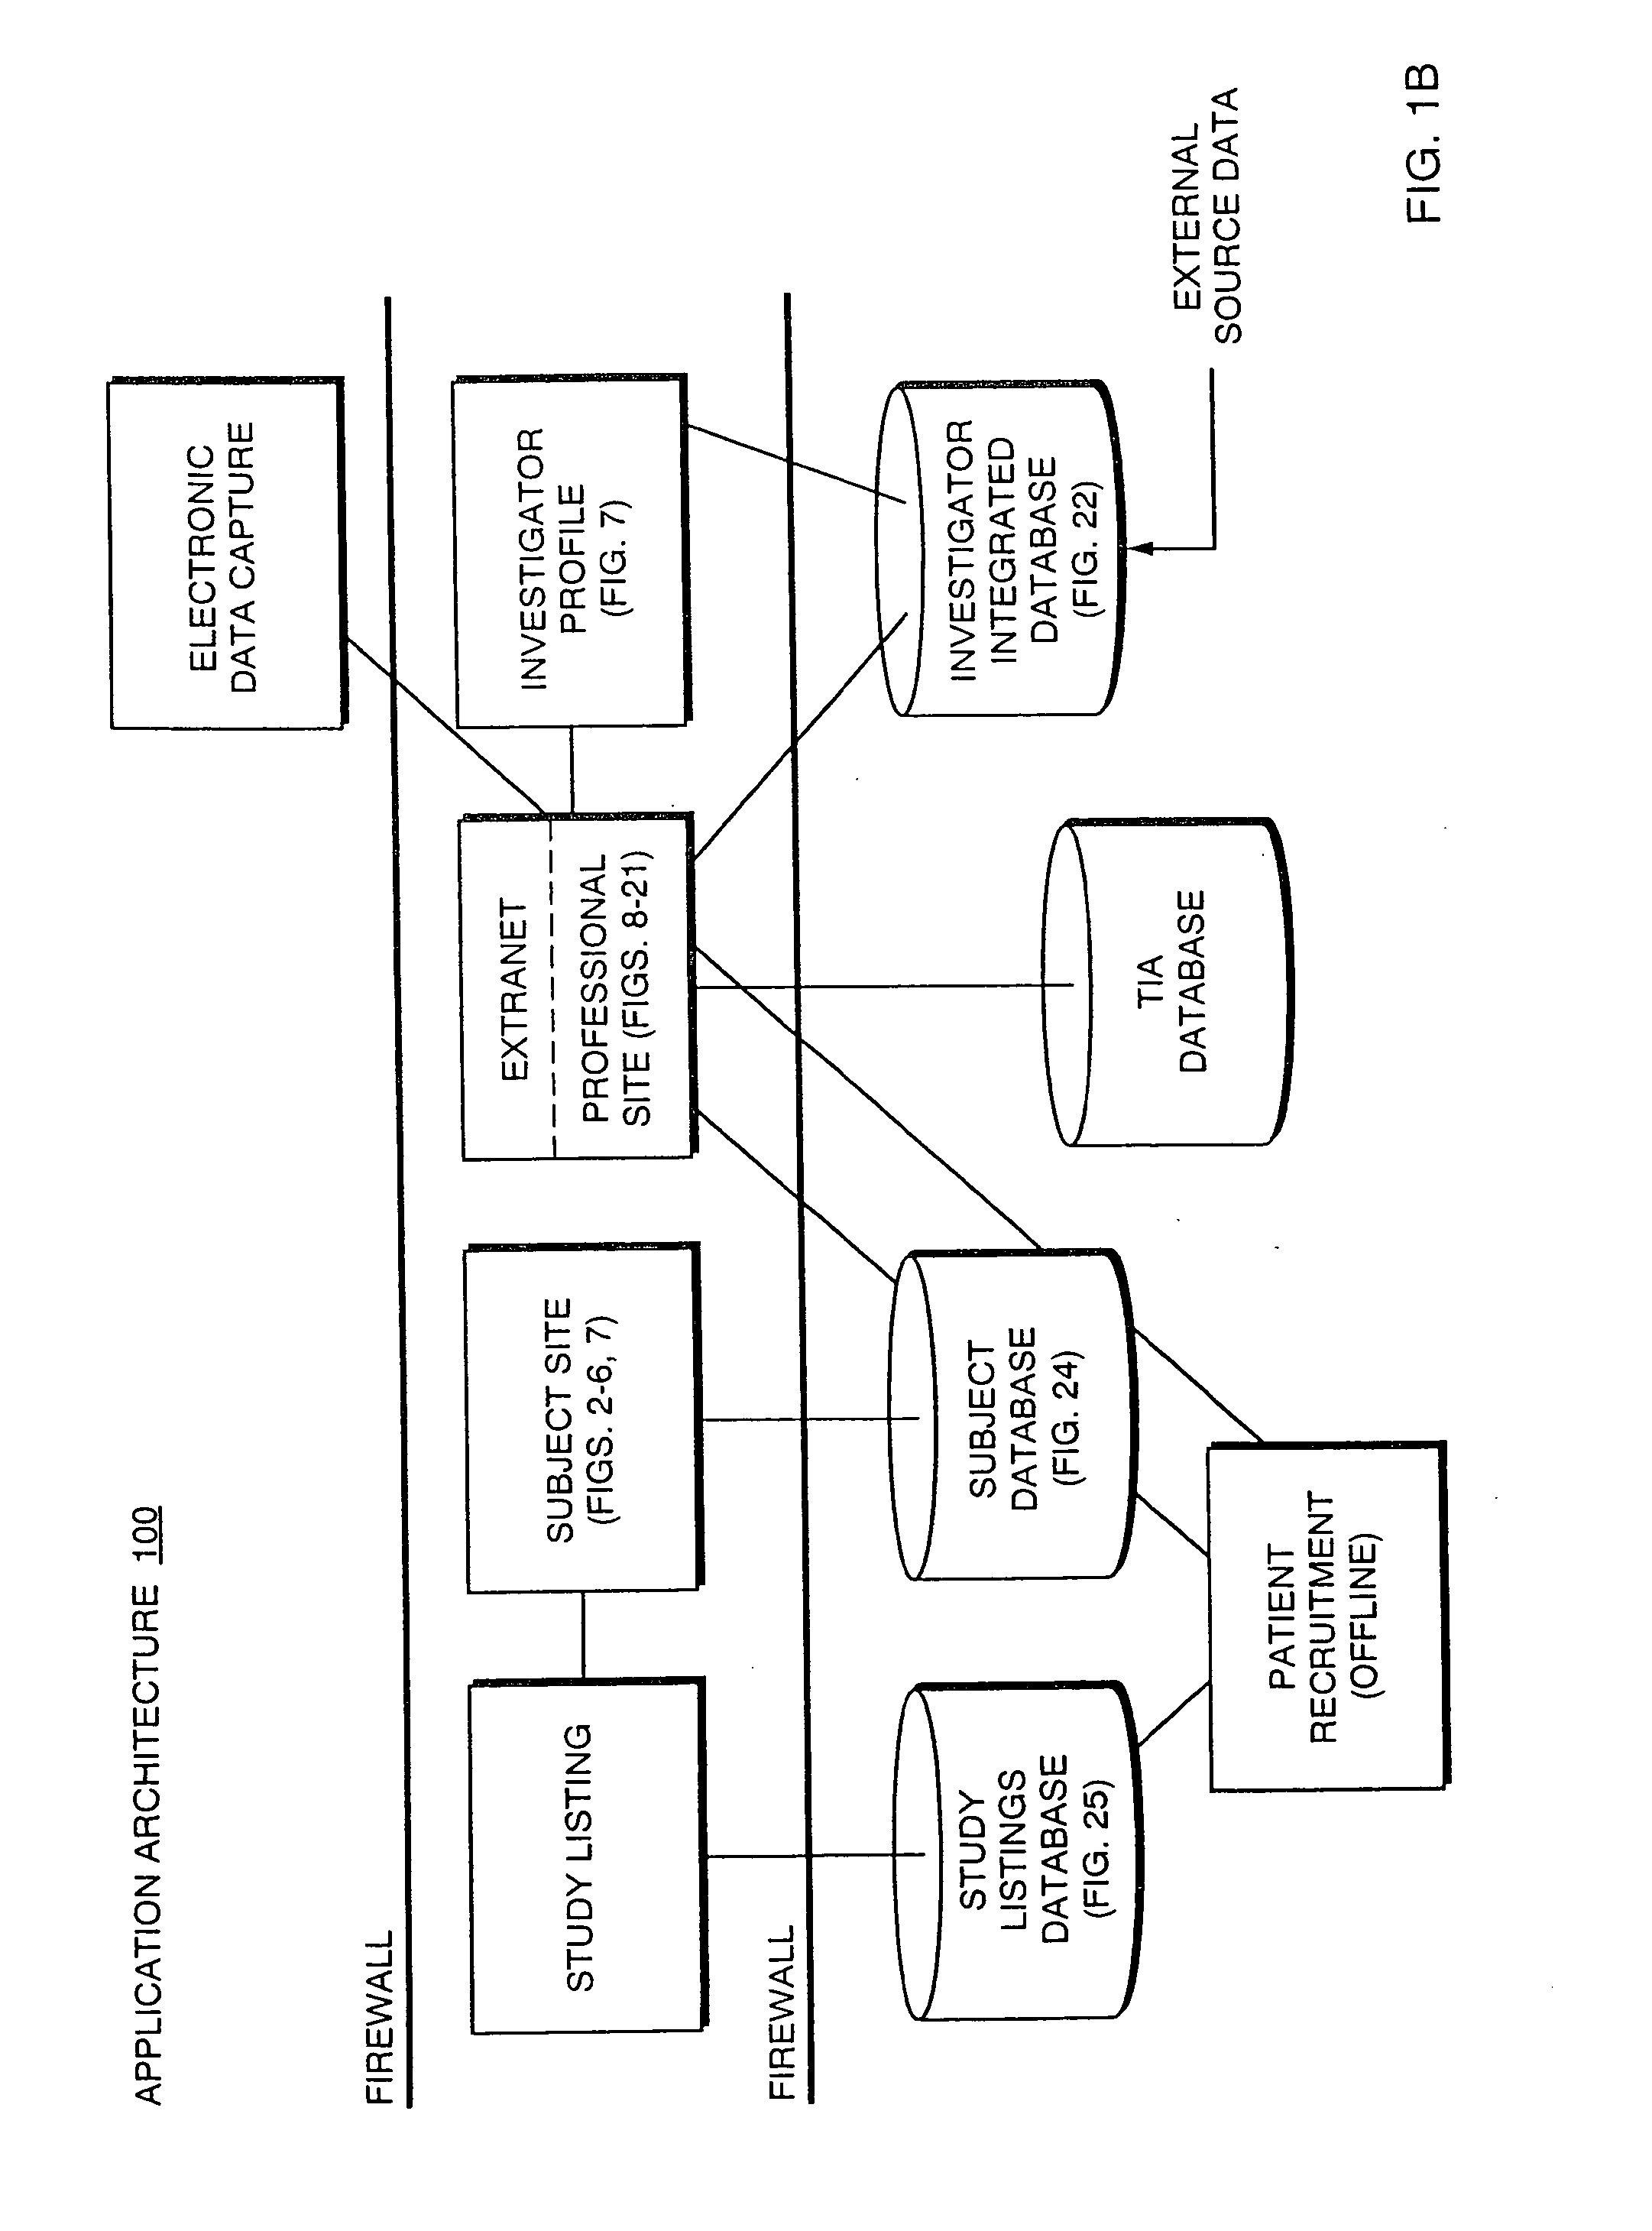 Systems and Methods for Selecting and Recruiting Investigators and Subjects for Clinical Studies